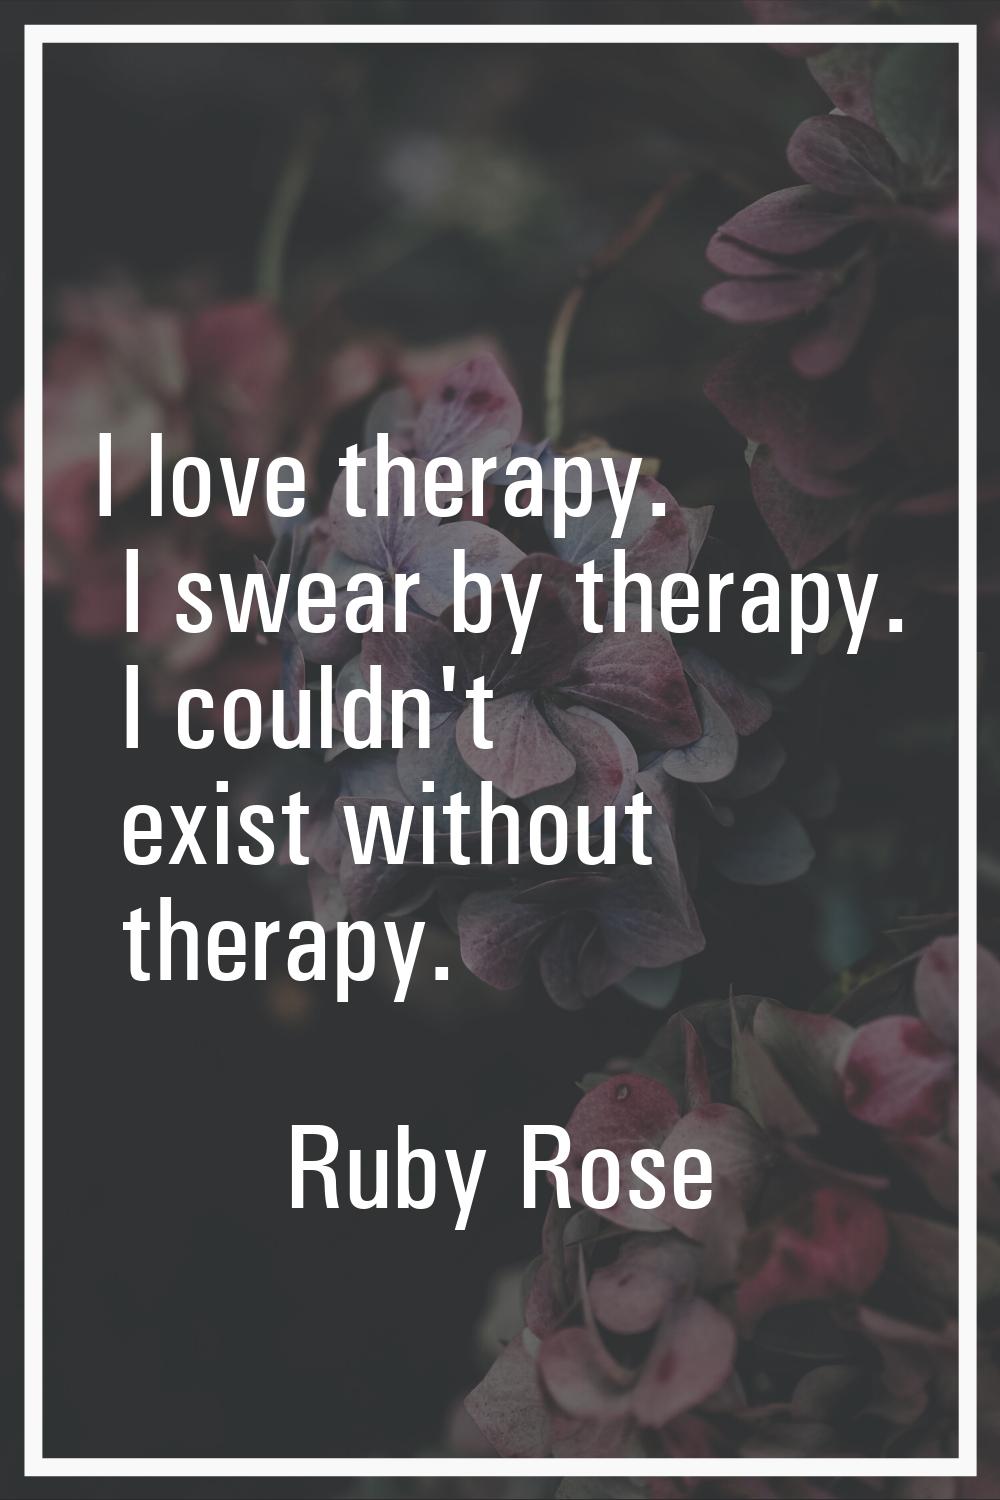 I love therapy. I swear by therapy. I couldn't exist without therapy.